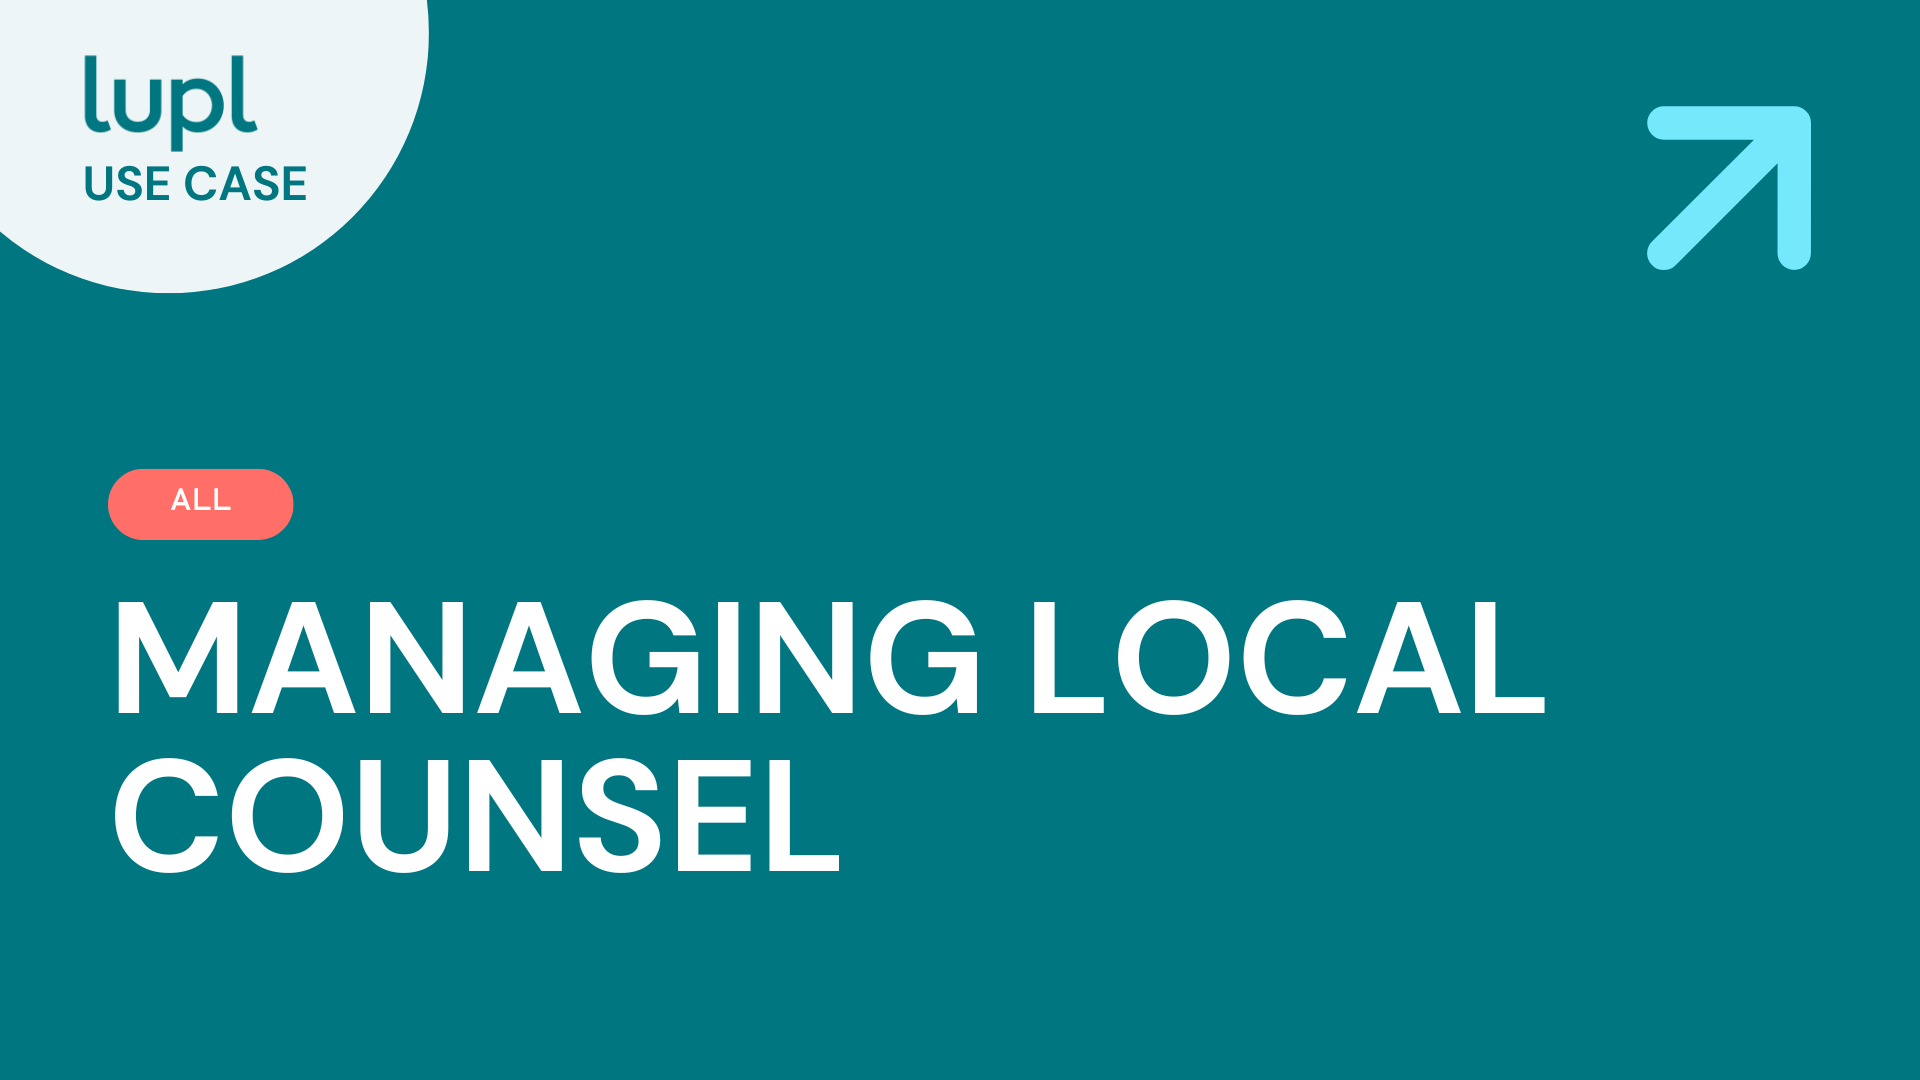 USE CASE - Managing local counsel